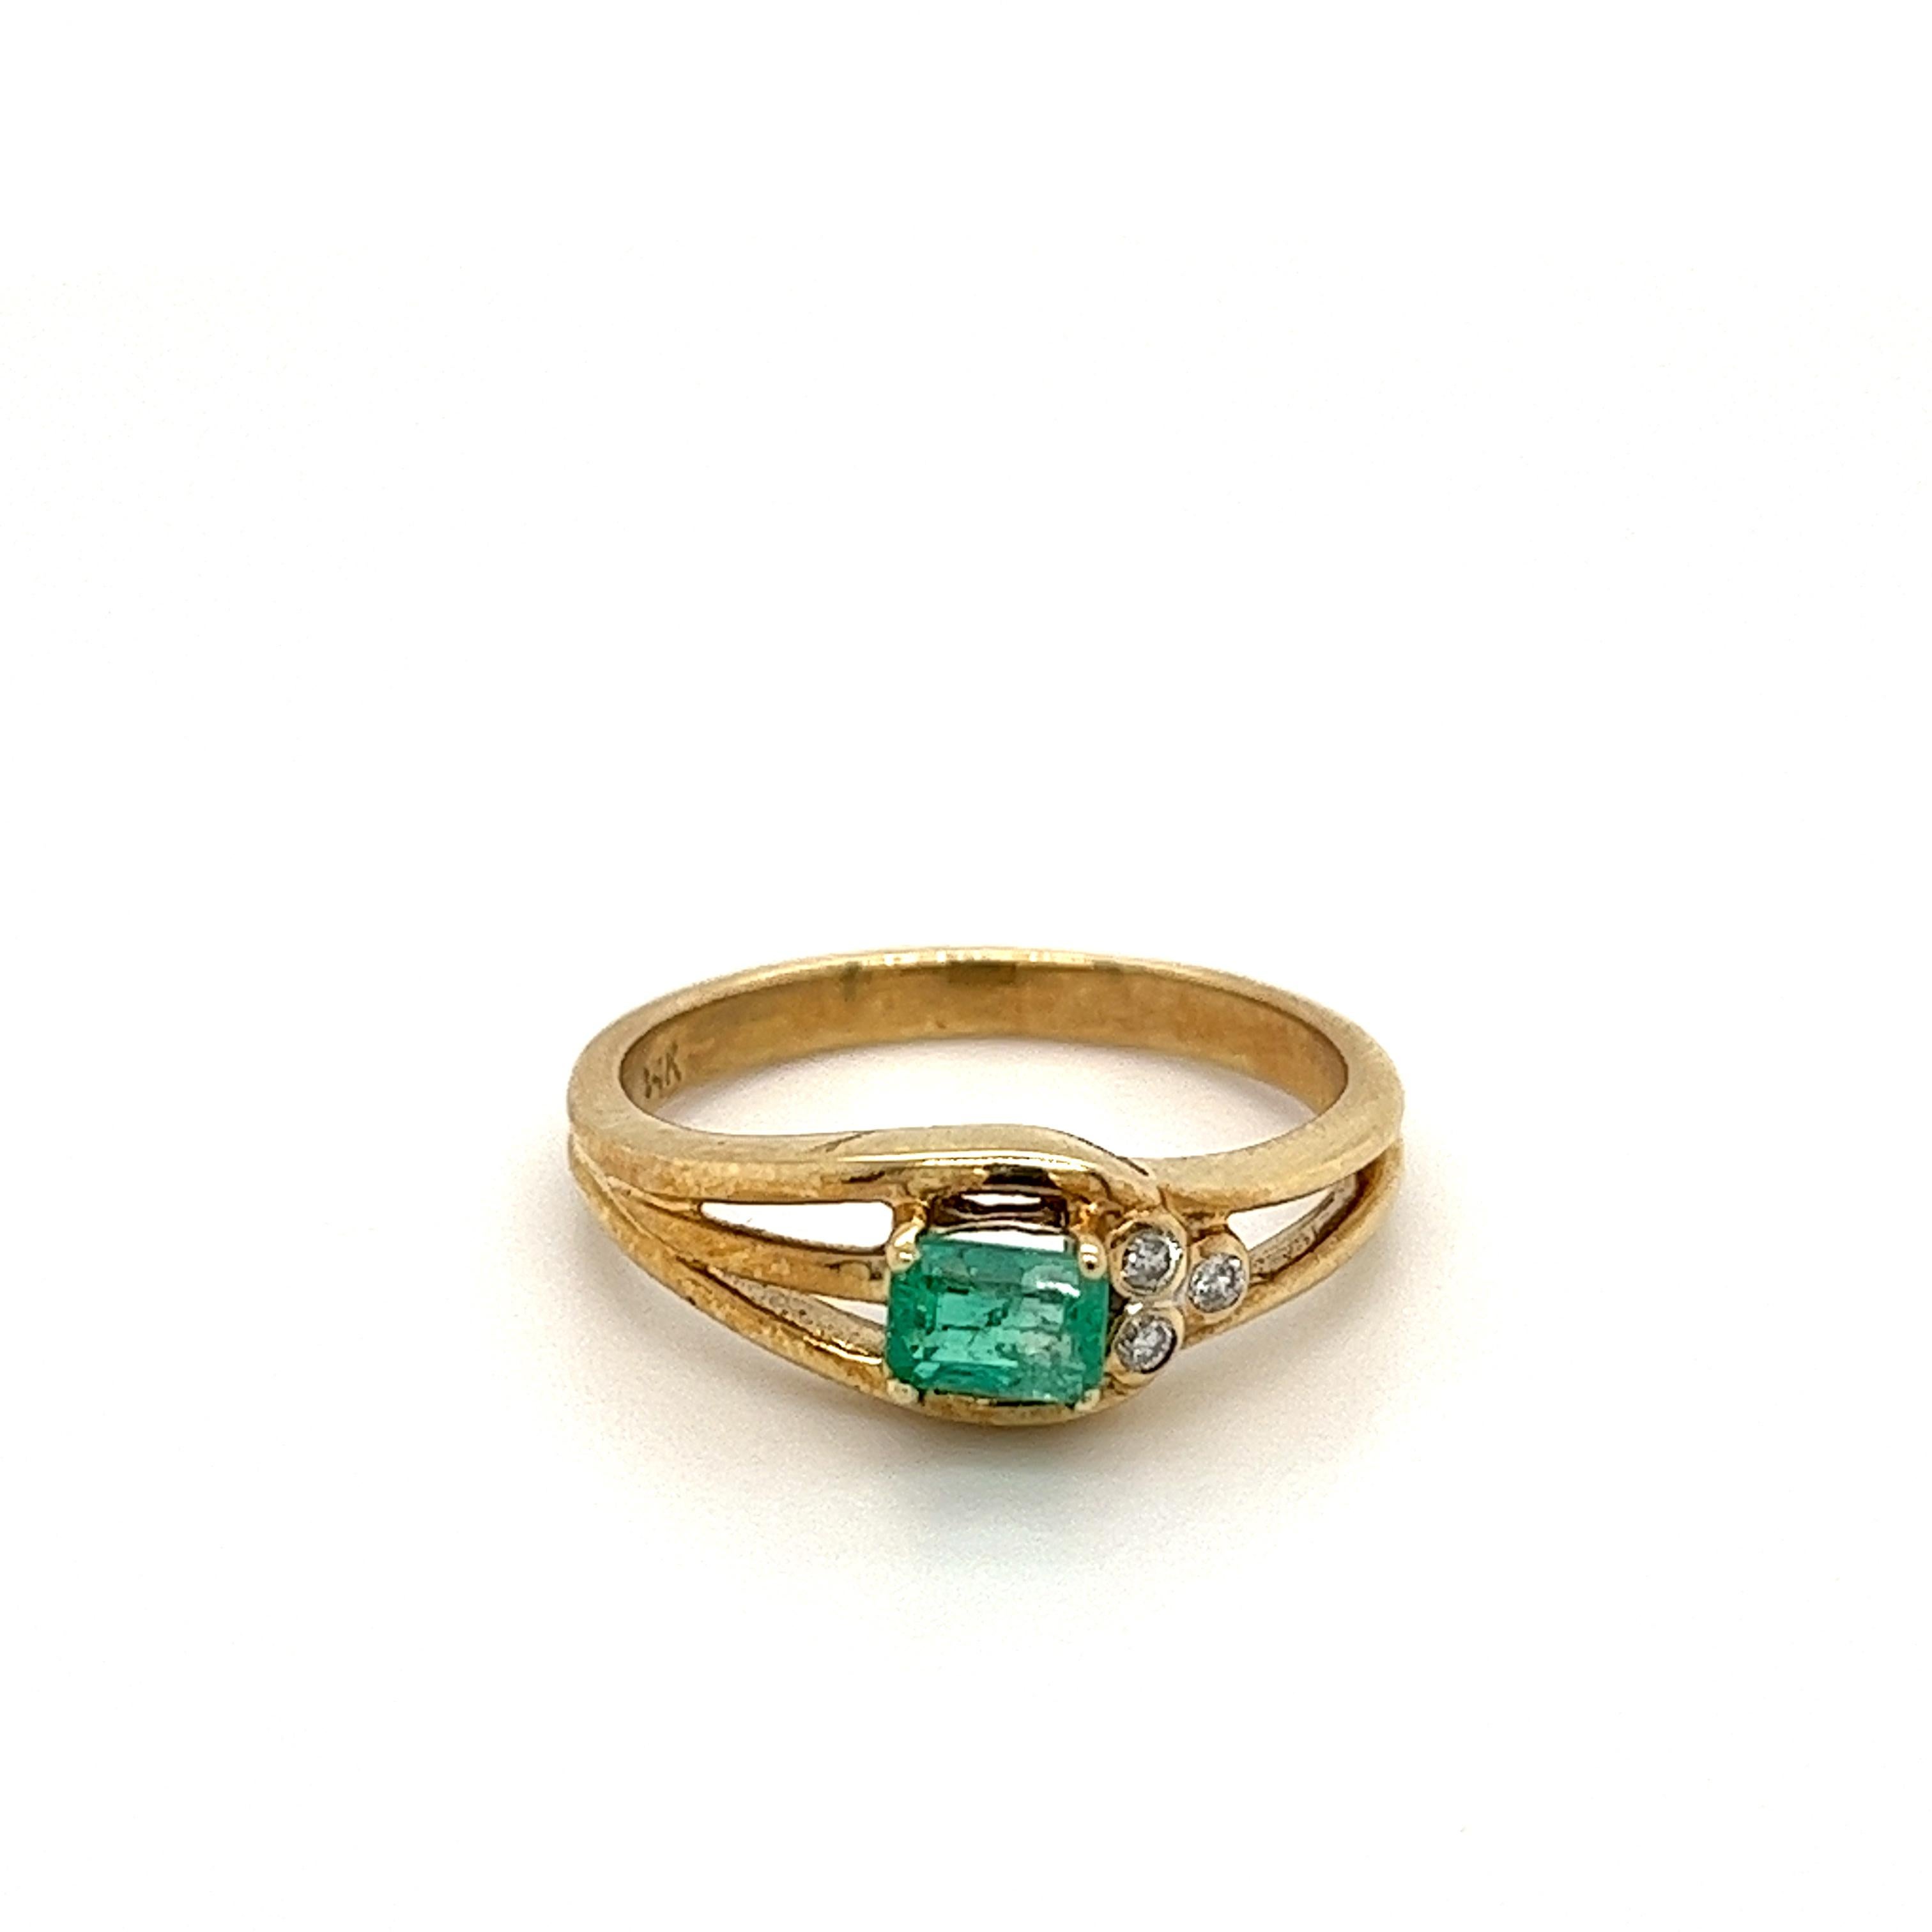 Cute and dainty natural emerald set with natural round cut diamond side stones in 18k yellow gold ring. Hypoallergenic, waterproof, and tarnish-proof. Ideal for daily wear. 

Specifics:
✔ Natural Emerald
✔ Natural Diamonds 
✔ Gold Karat: 18K 
✔